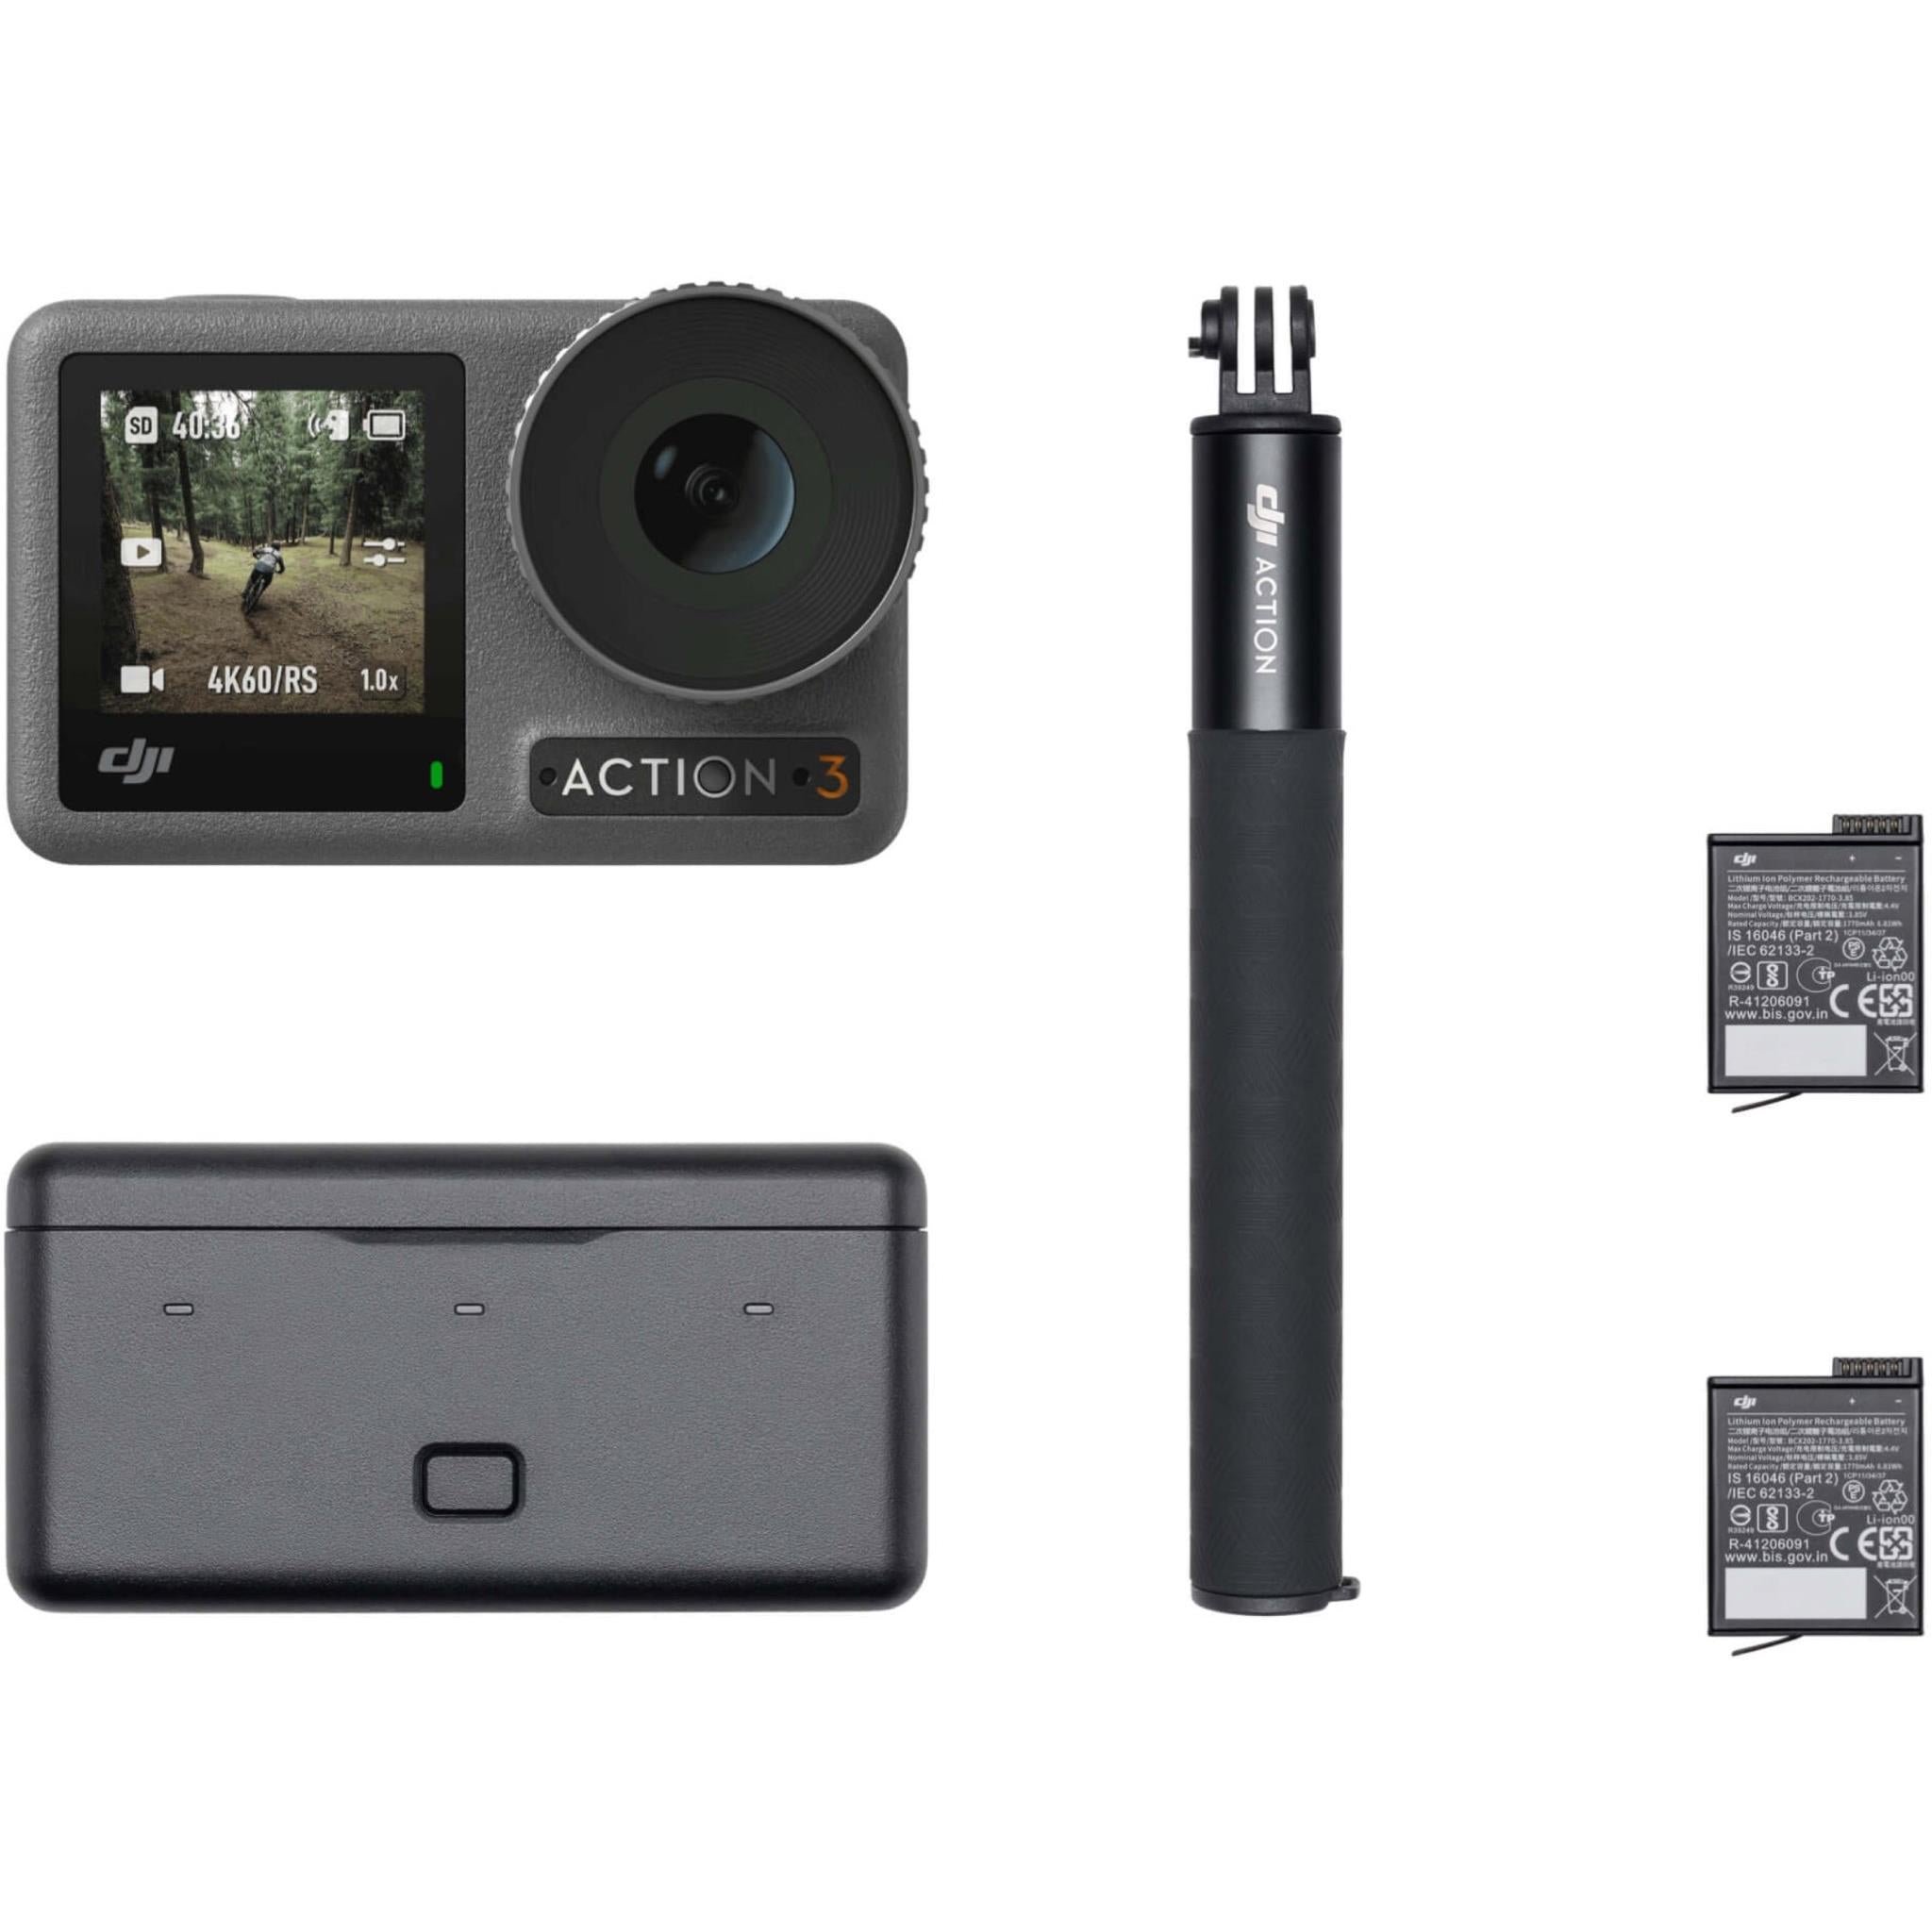 DJI Osmo Action 4 Adventure Combo with Free Sandisk Extreme MicroSD 64